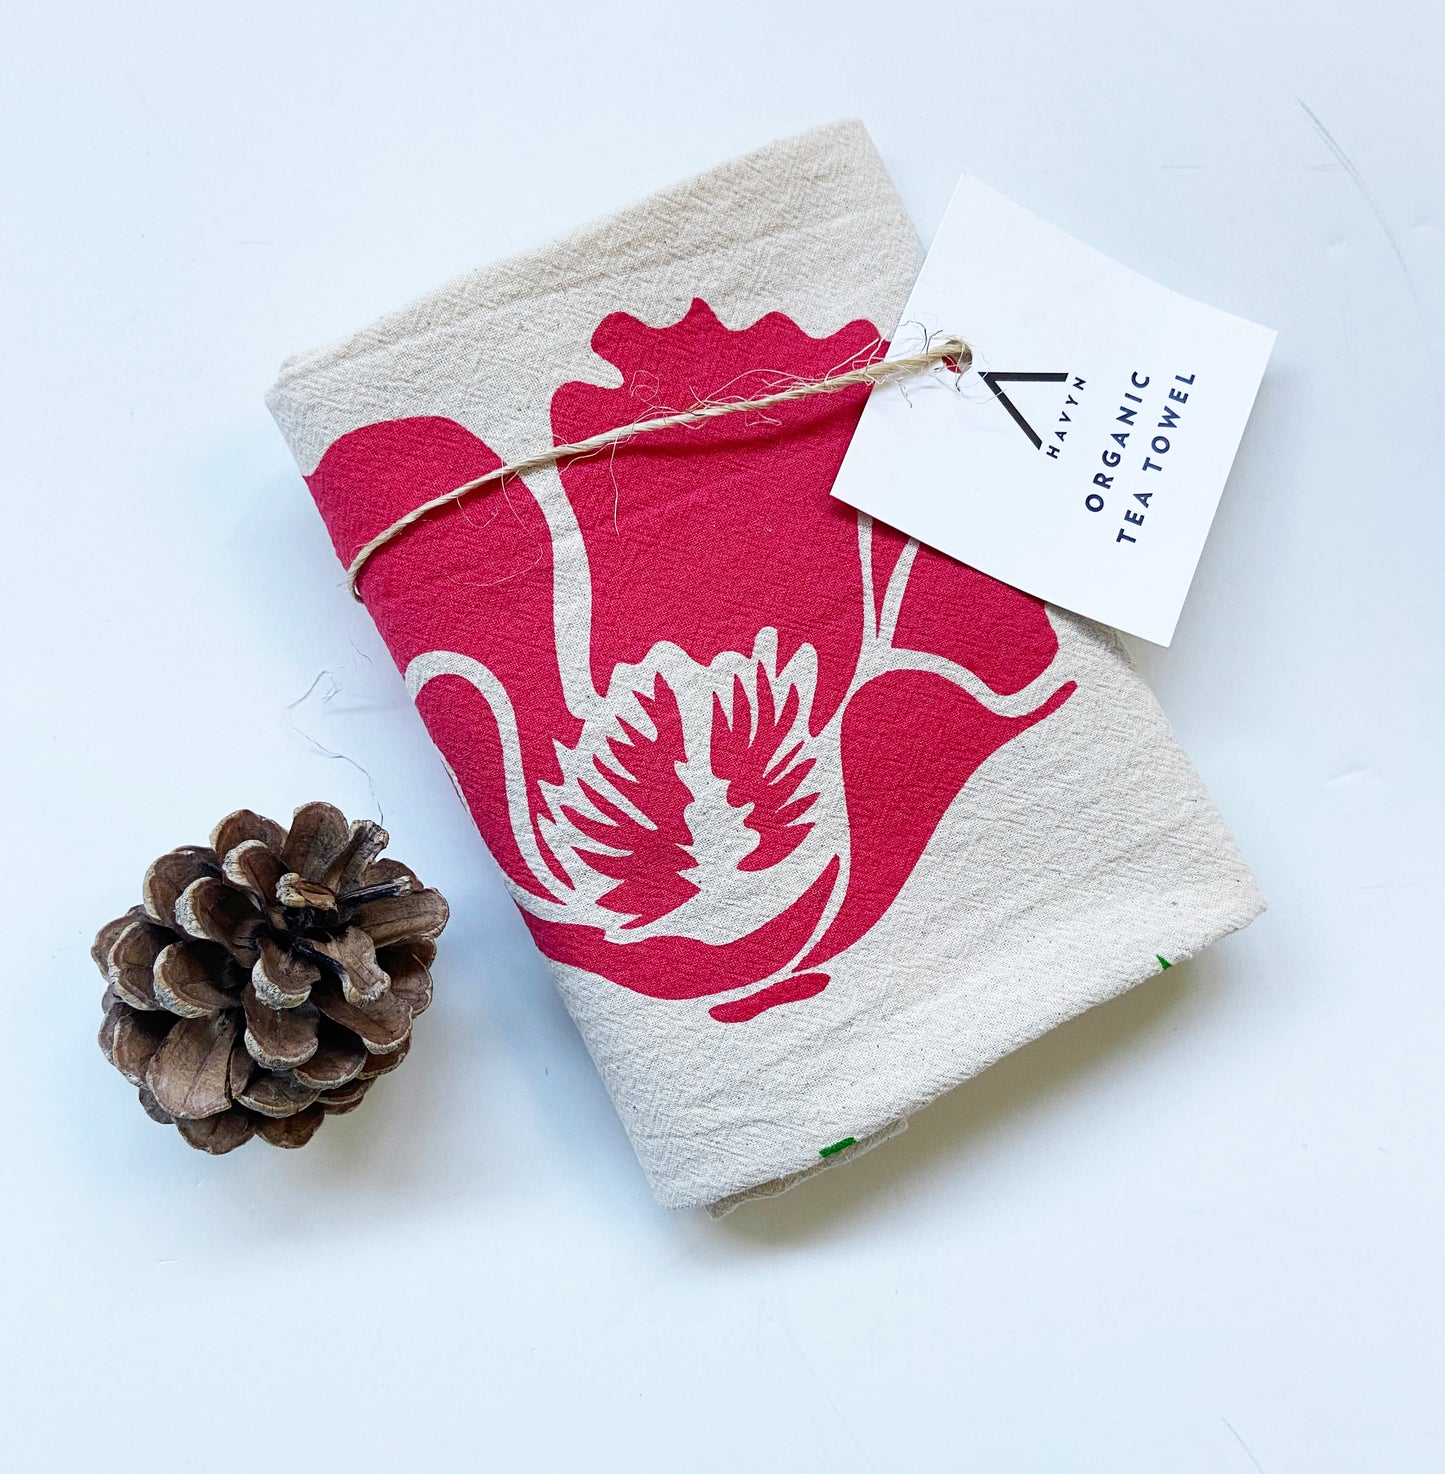 Poppy Flower Hand Printed Organic Tea Towel - Red and Green